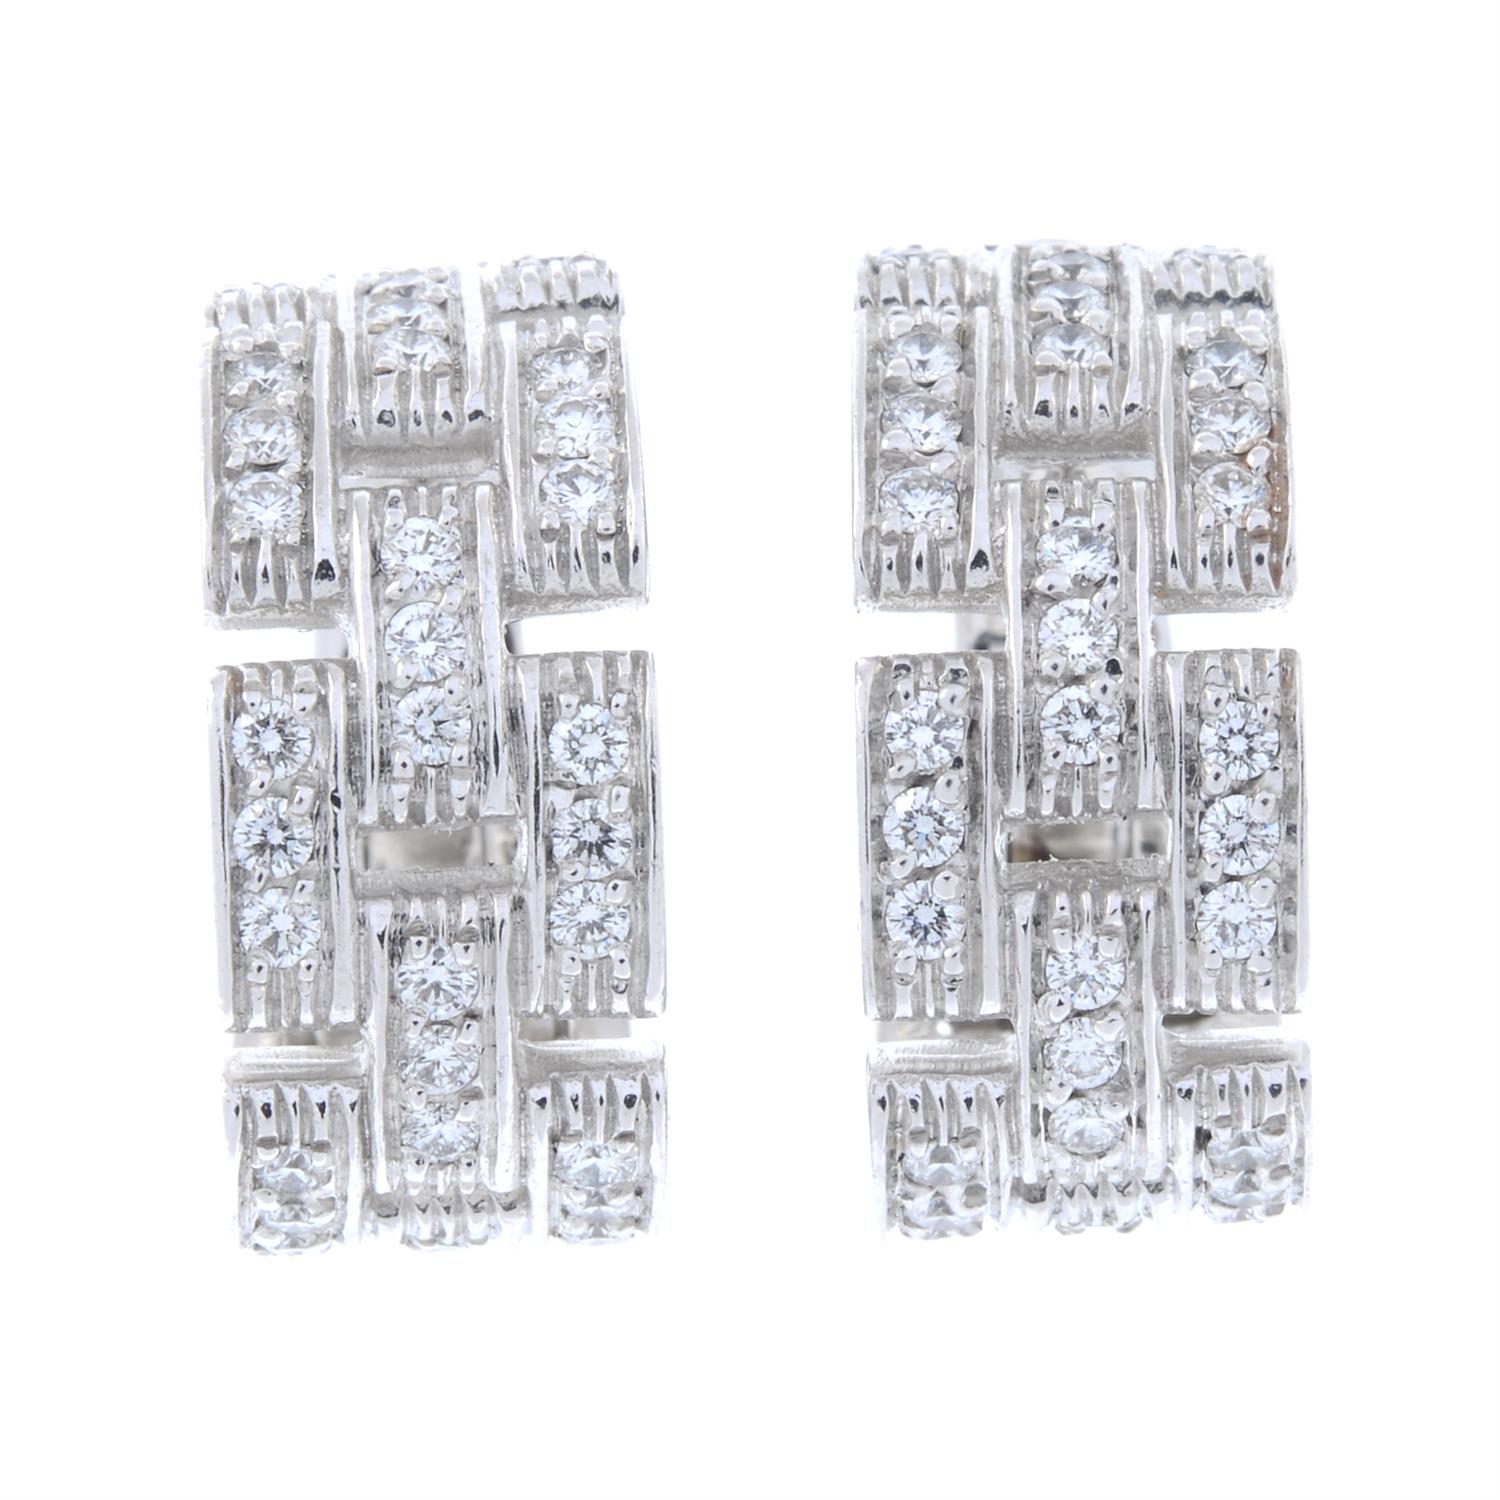 Diamond 'Maillon Panthère' earrings, by Cartier - Image 2 of 3